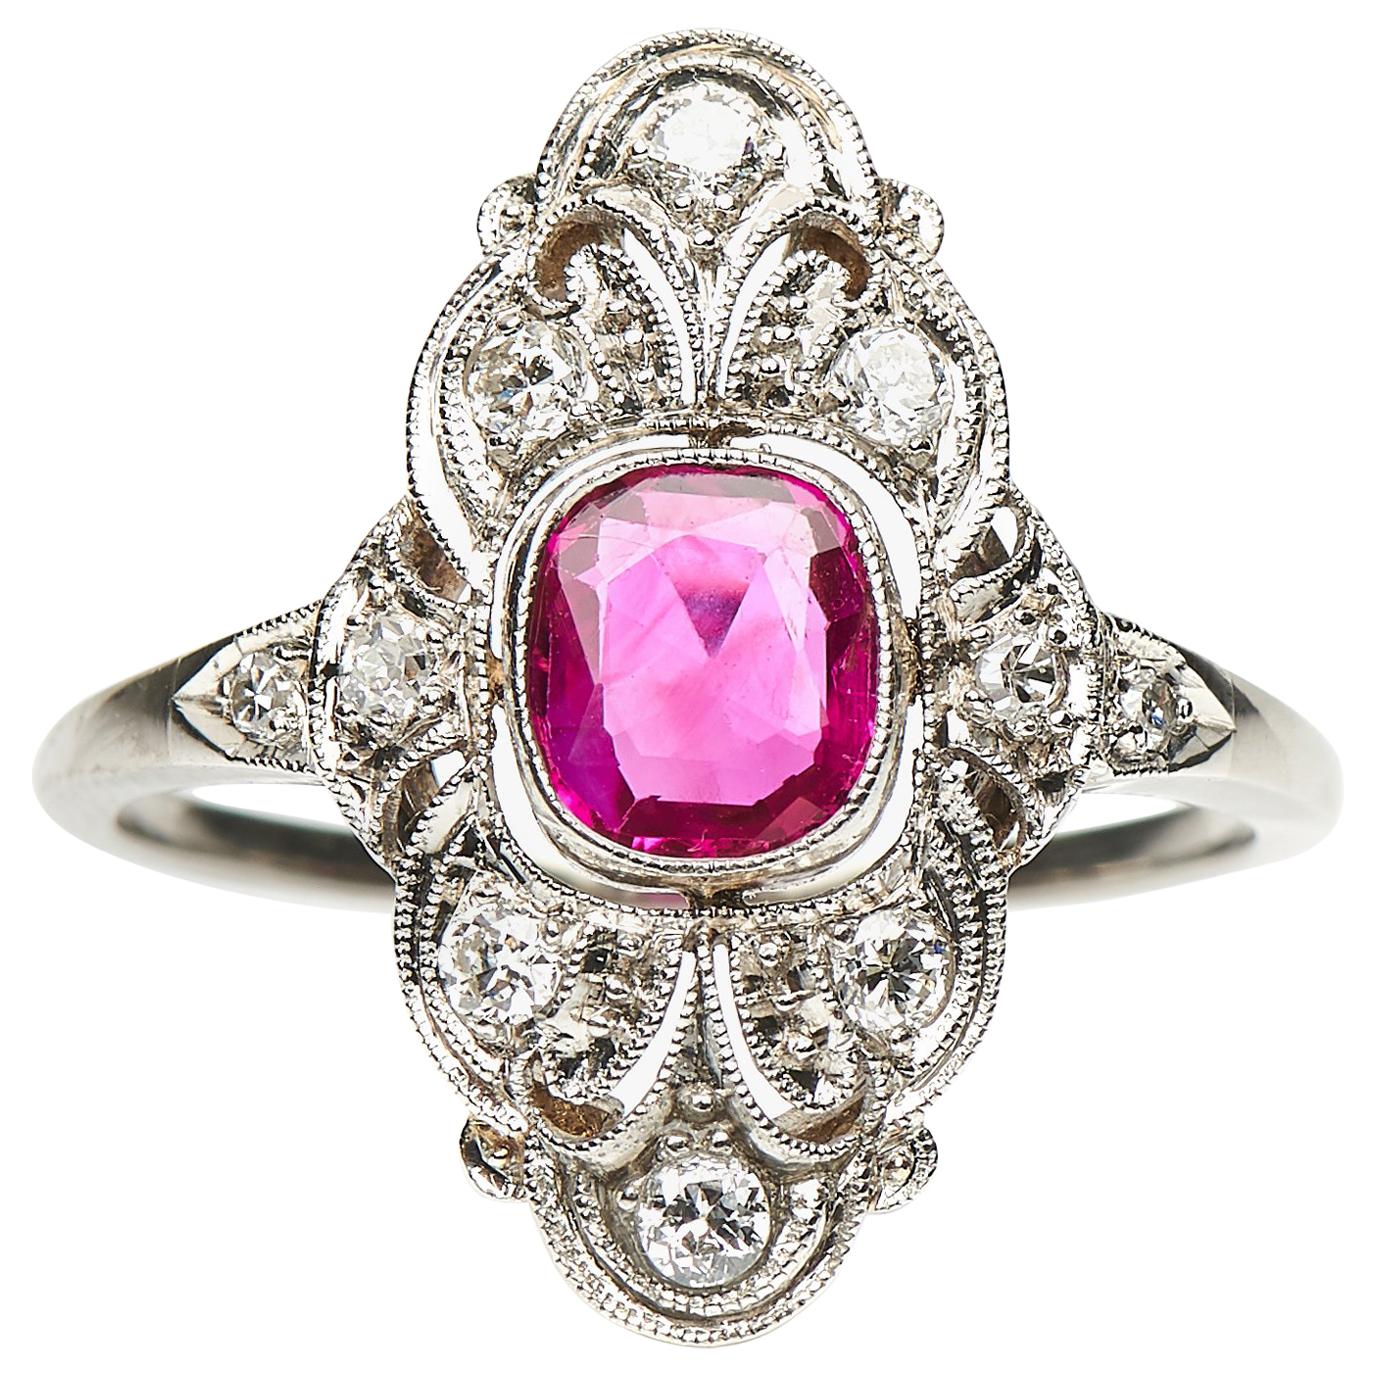 Antique, Art Deco, White Gold, Natural Burmese Ruby and Diamond Engagement Ring